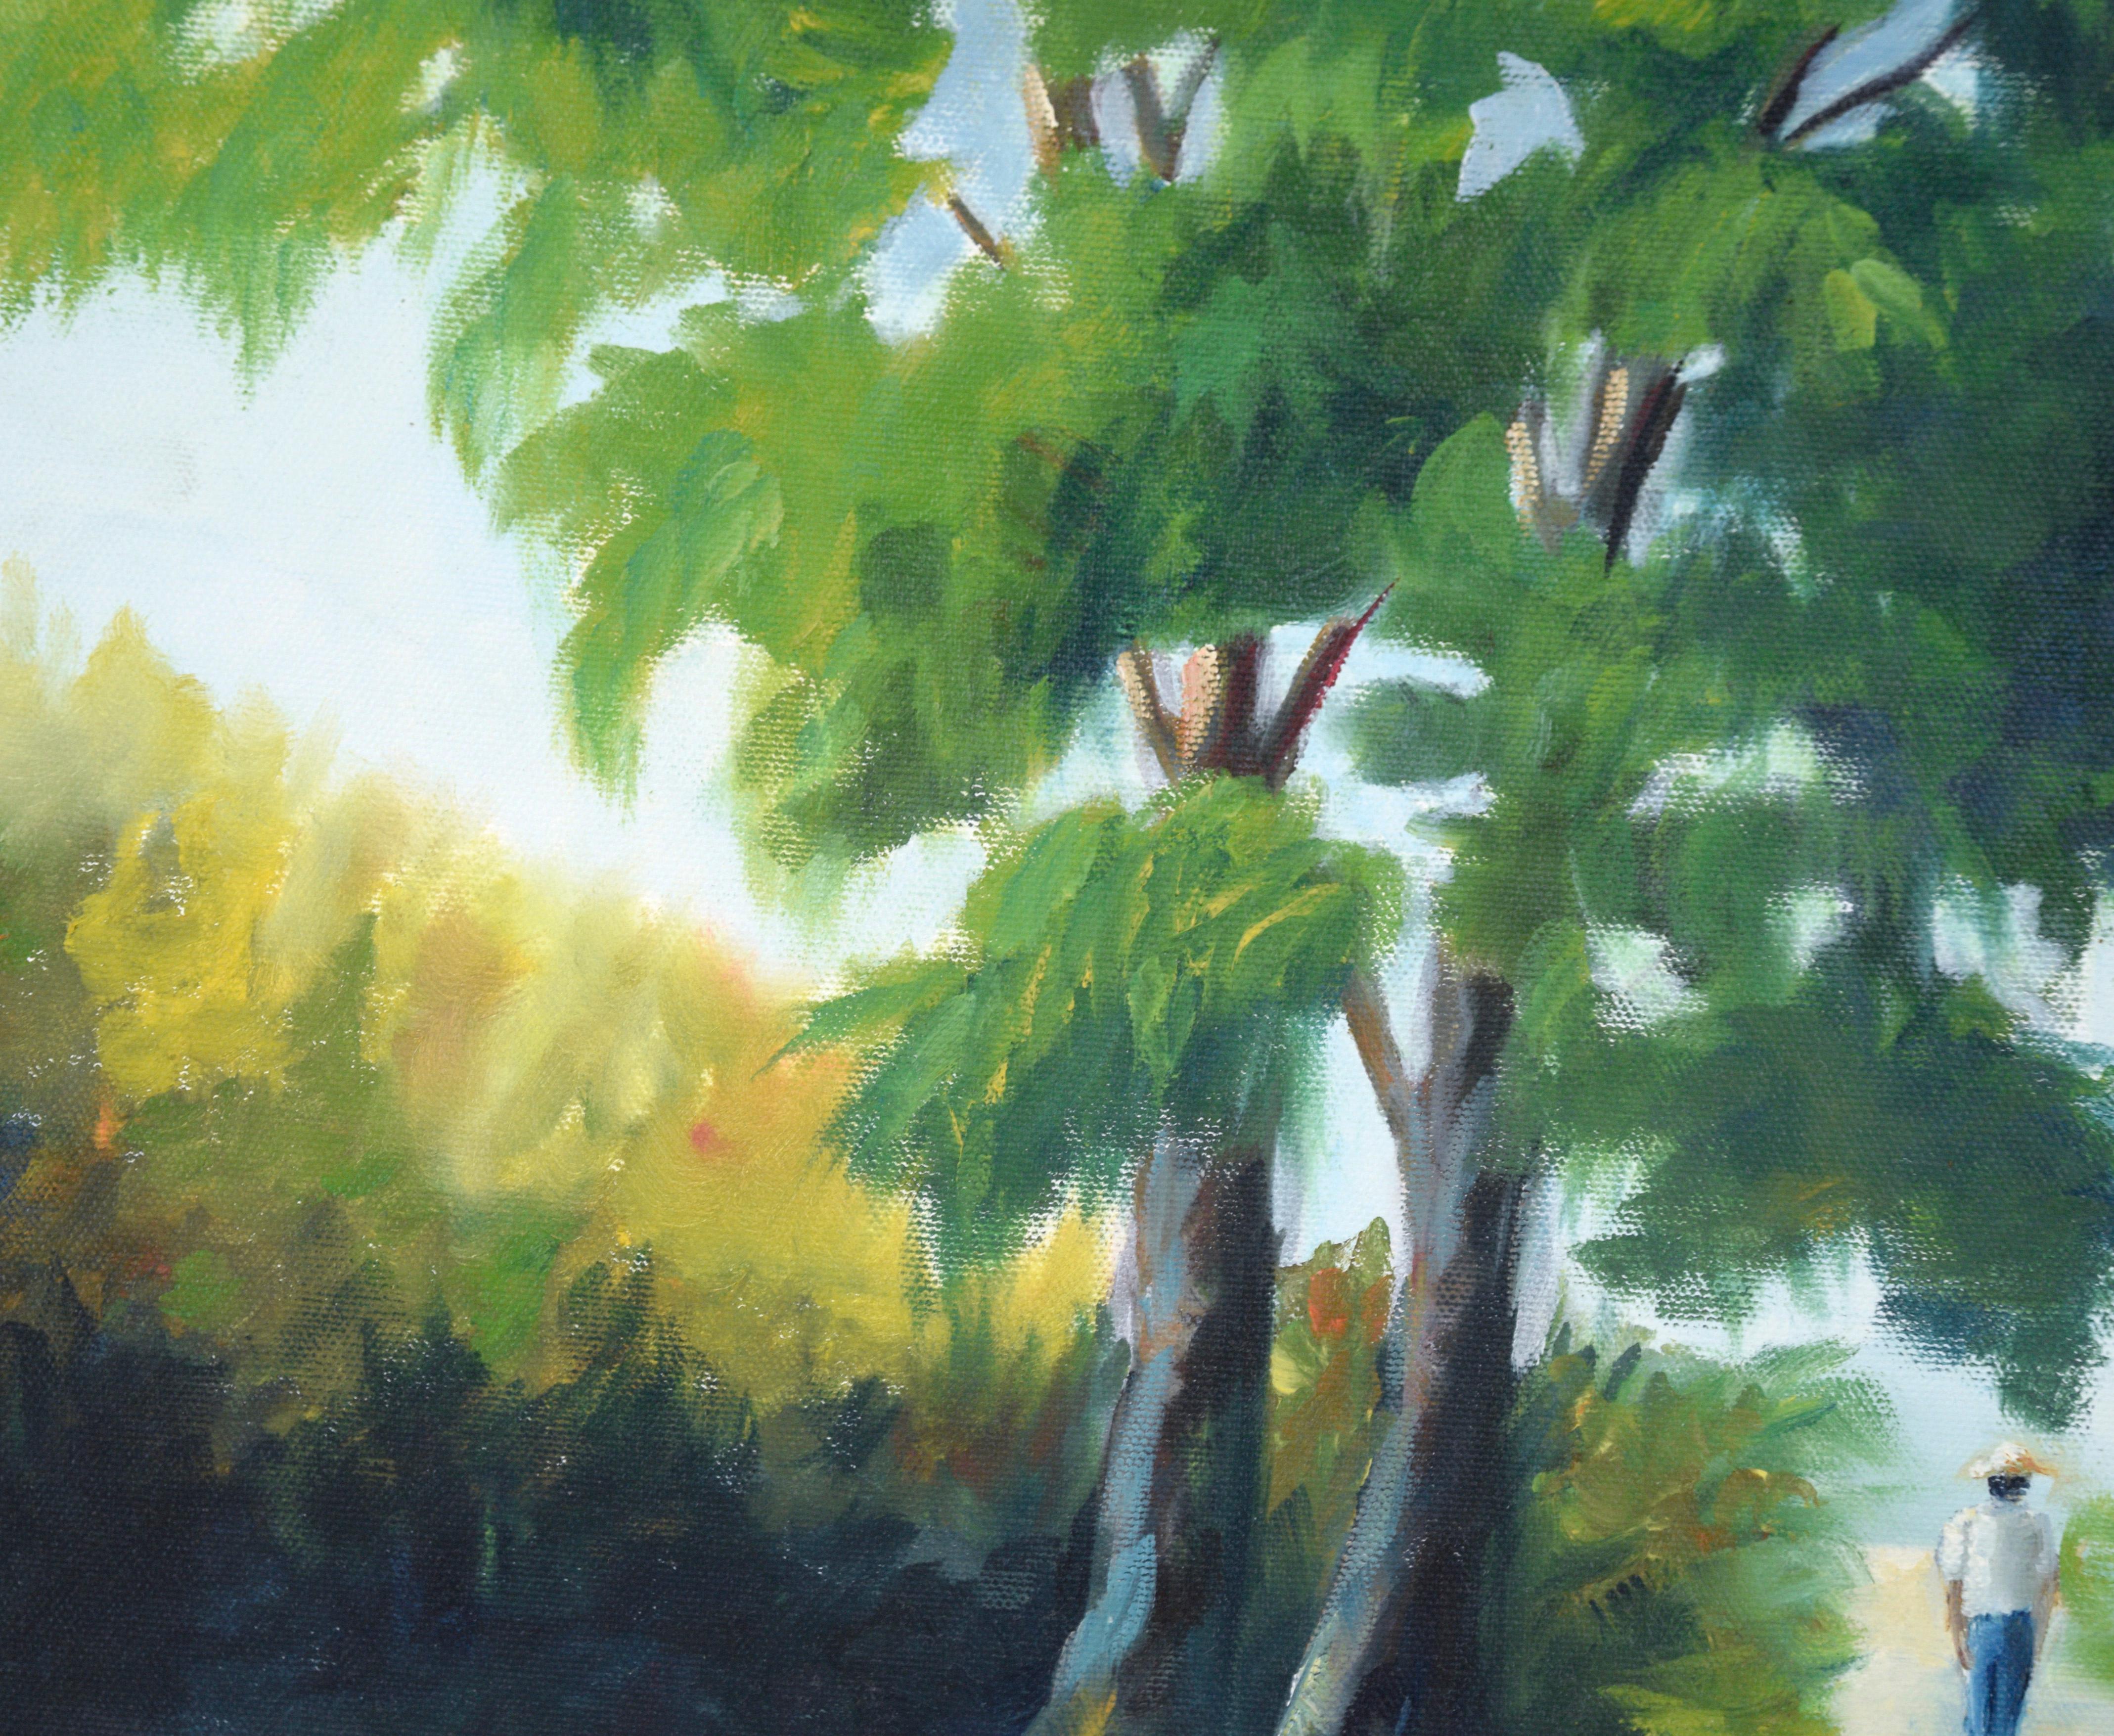 Walking the Path Under the Trees - Landscape in Acrylic on Canvas

Bright and colorful landscape by an unknown artist (20th Century). Two large trees are the central focus of this piece, with lush greens and deep shadows. The trees stand out against